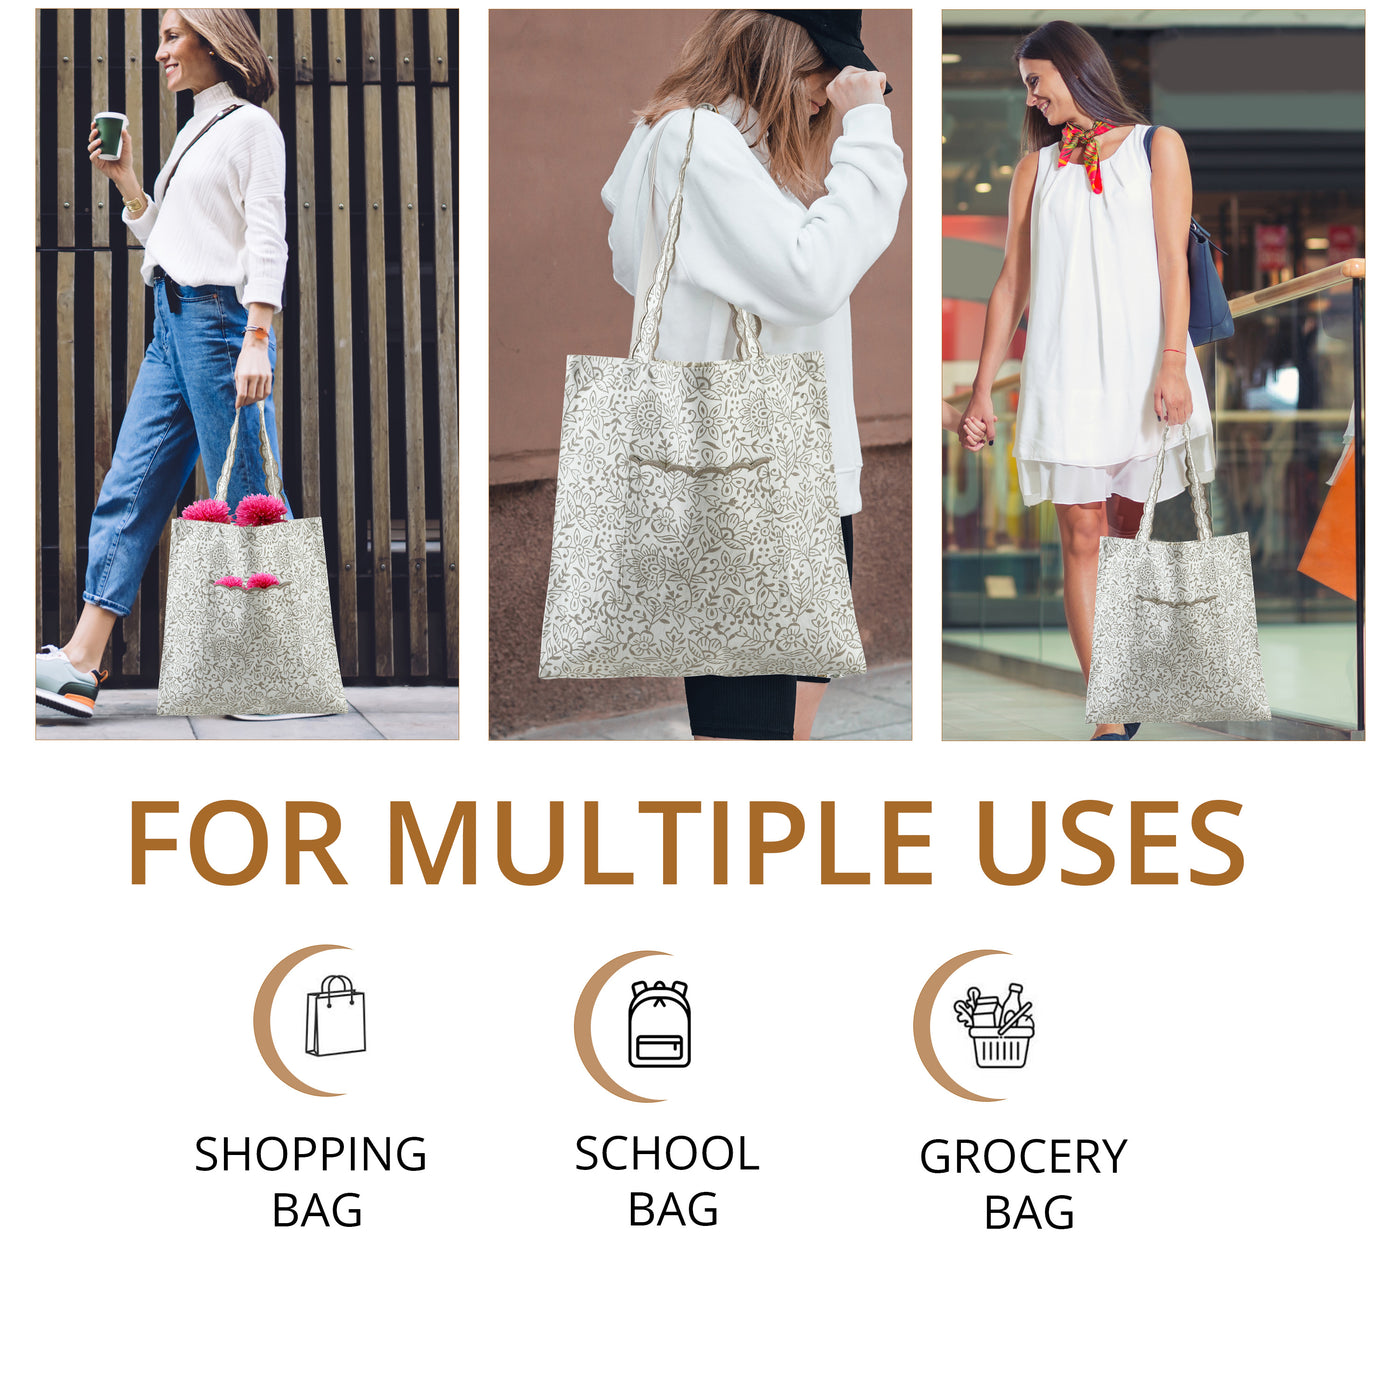 Fabricrush Taupe  Indian Hand Block Printed and Embroidery Scalloped Canvas Women's Aesthetic Bag for Shopping, Travelling, Office, Church, School